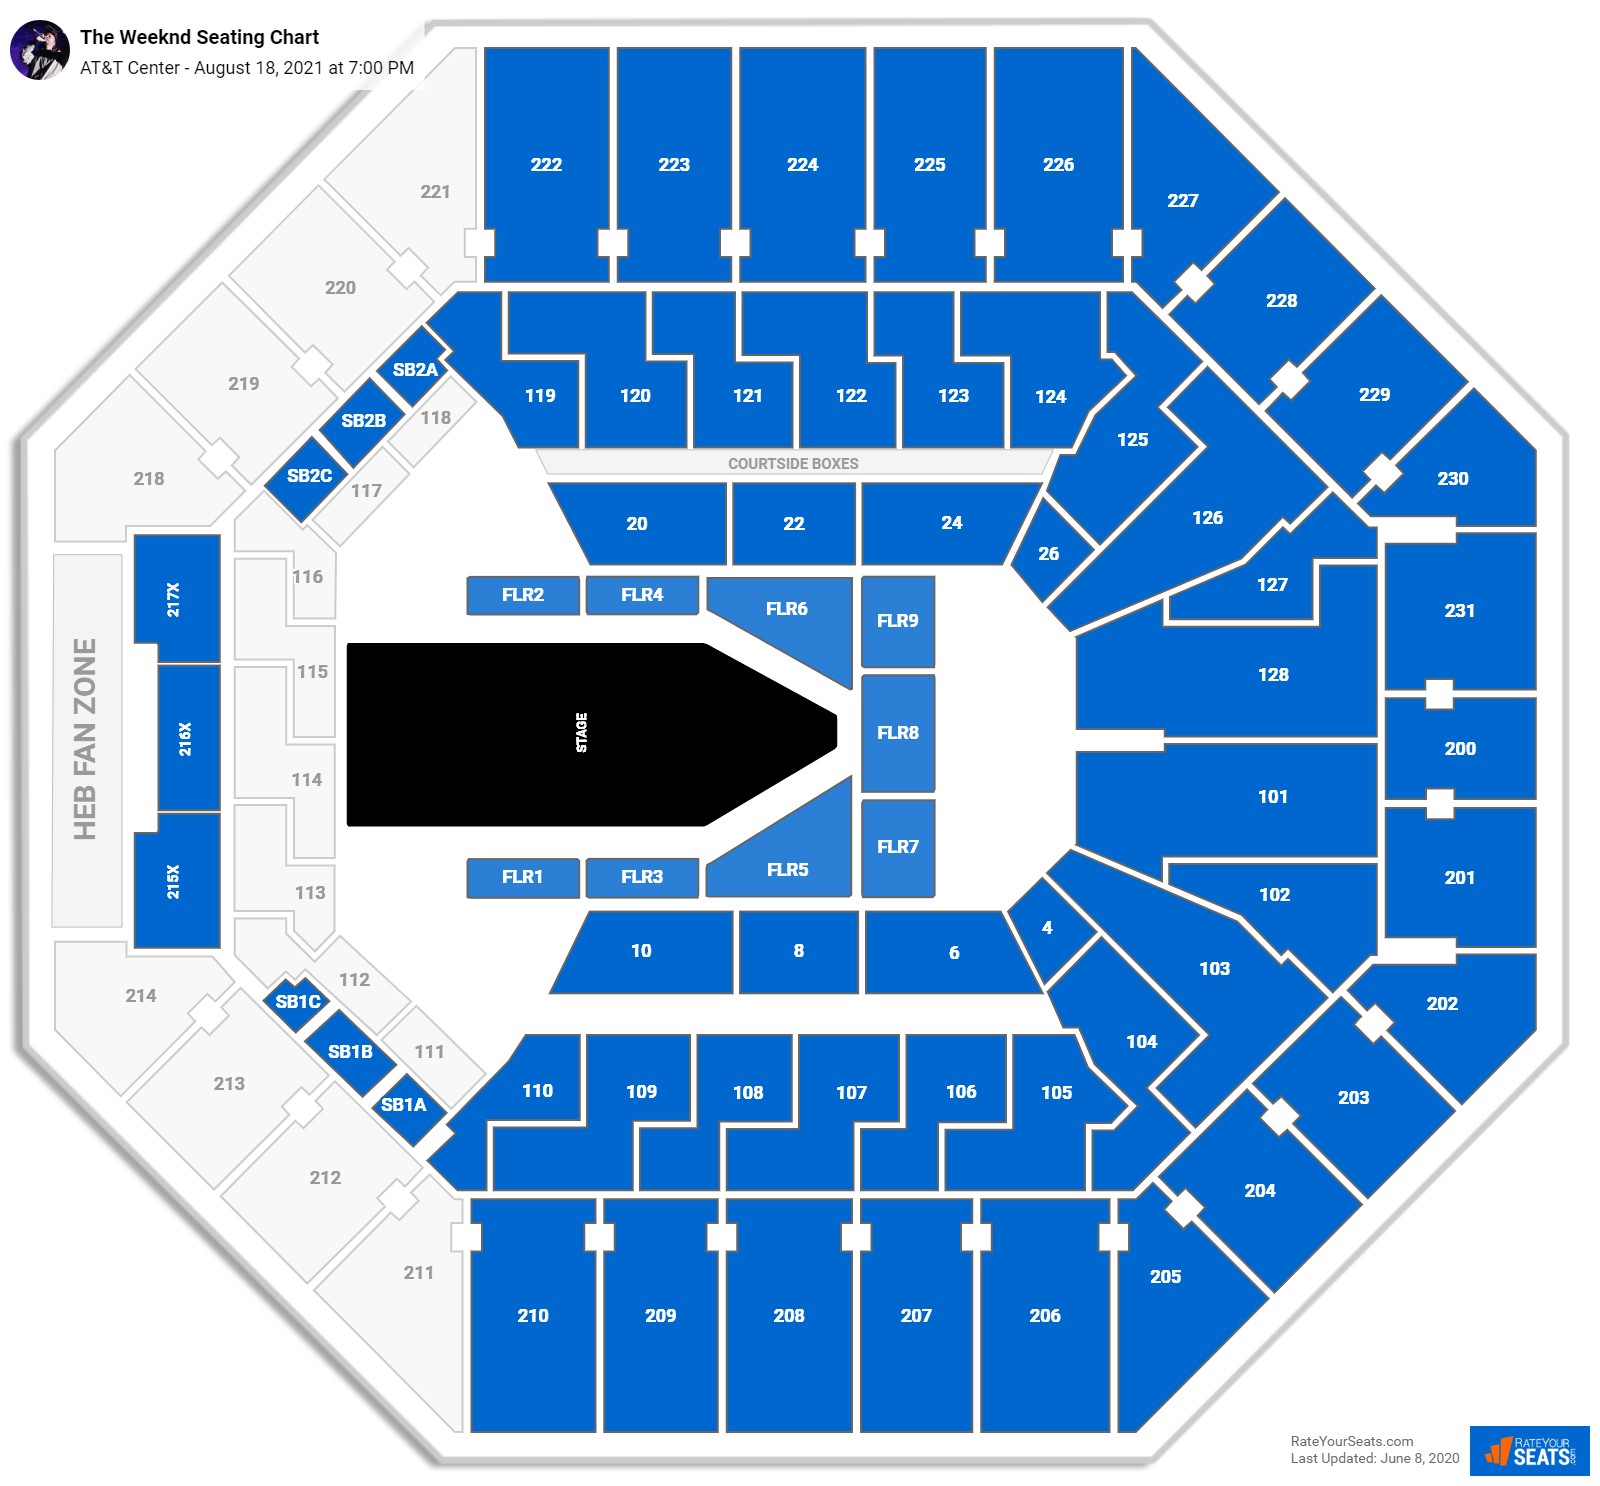 AT&T Center Seating Charts for Concerts